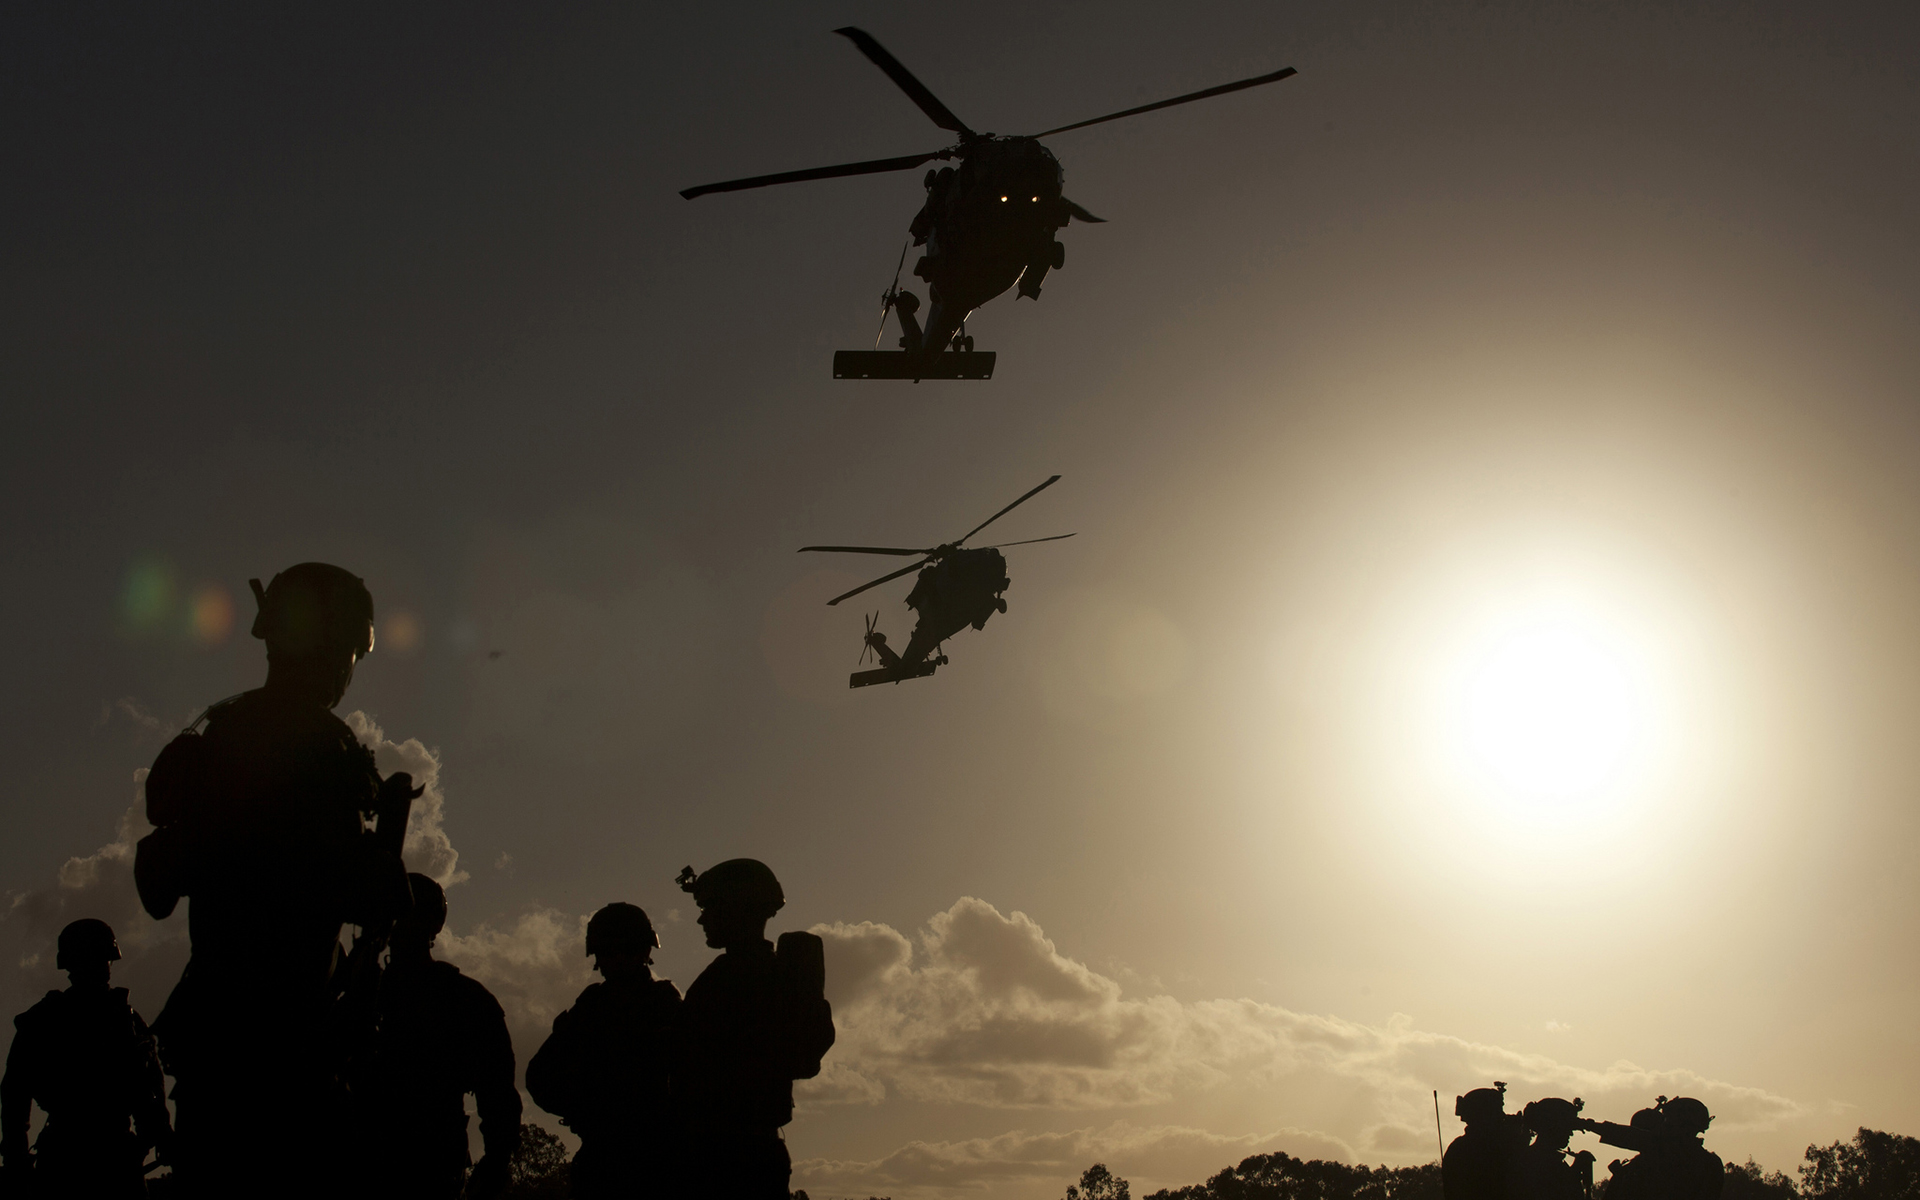 Soldiers Helicopters Sunlight Silhouette military wallpaperx1200